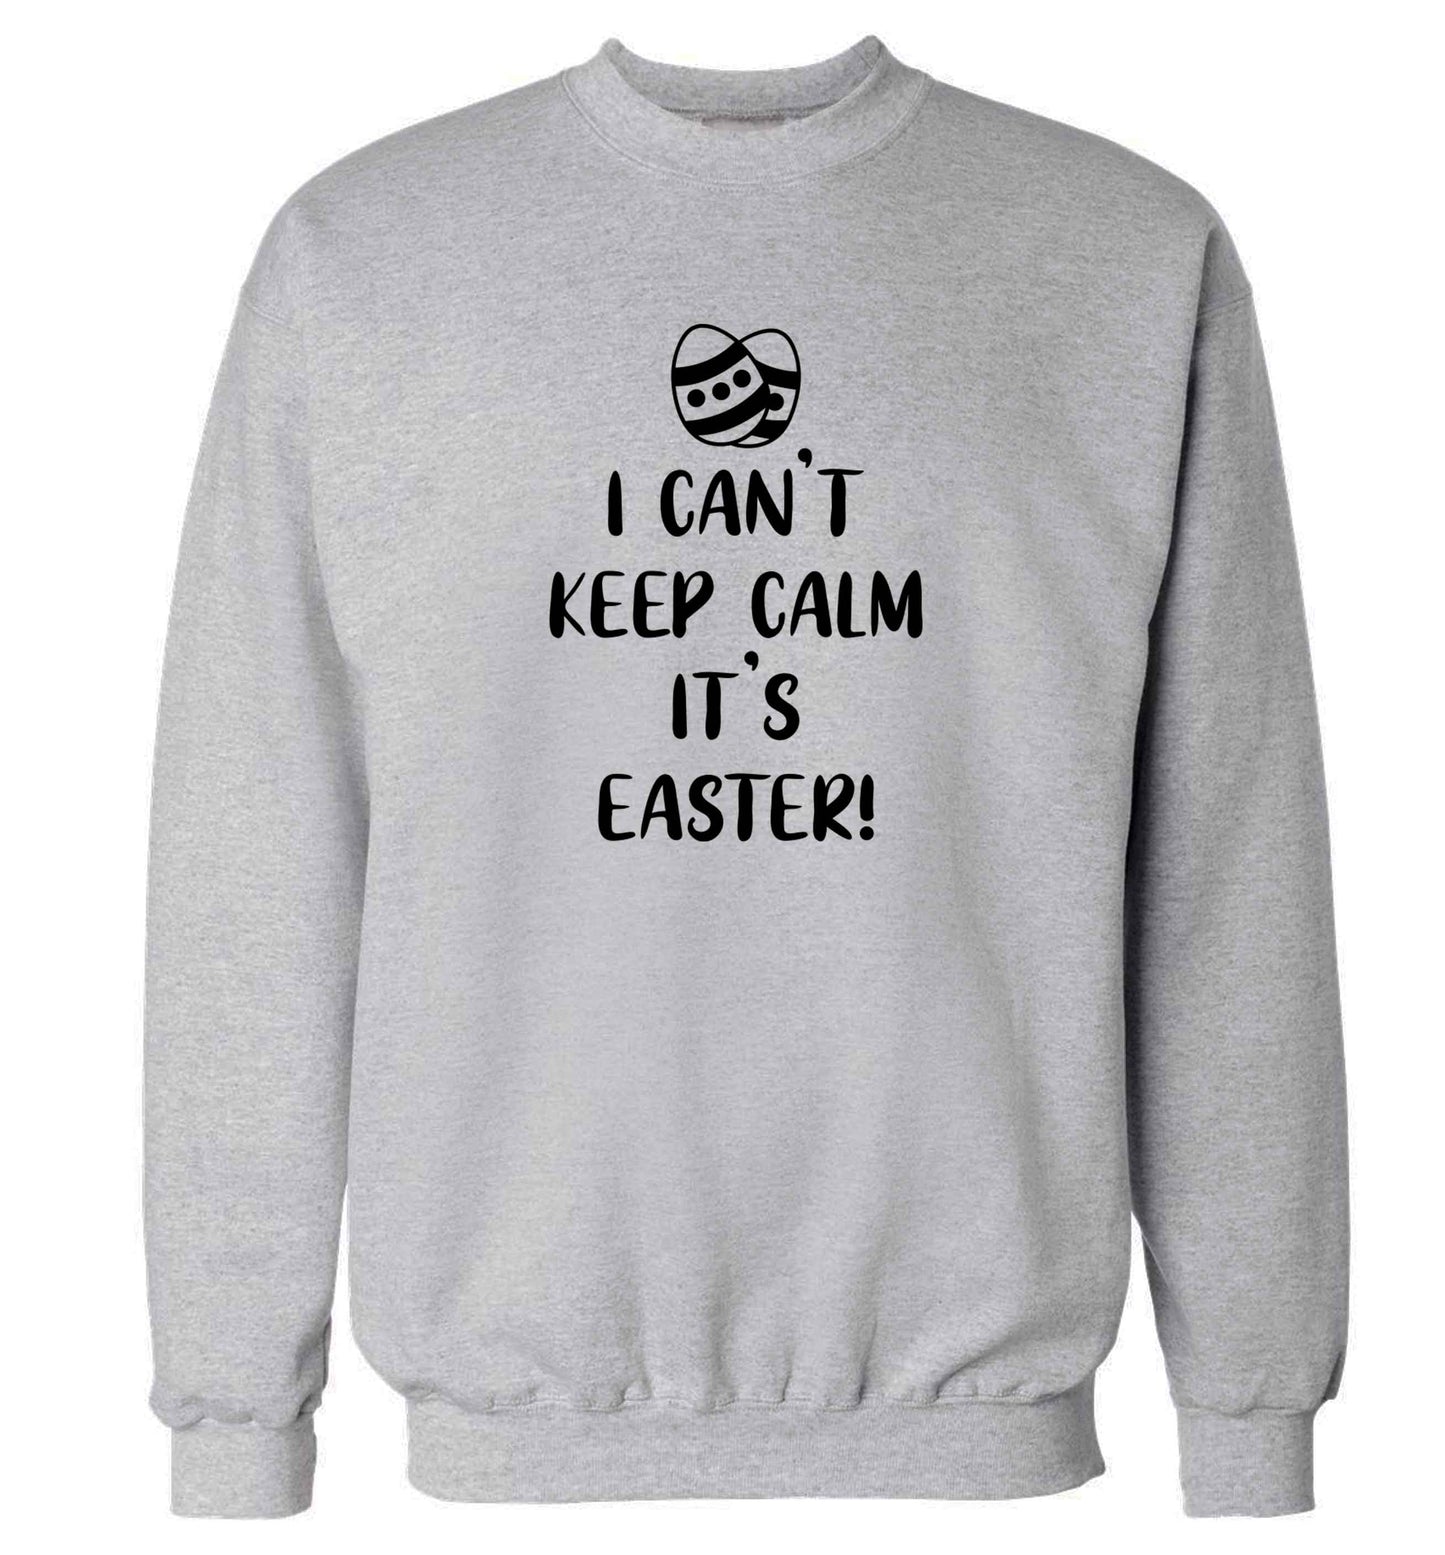 I can't keep calm it's Easter adult's unisex grey sweater 2XL